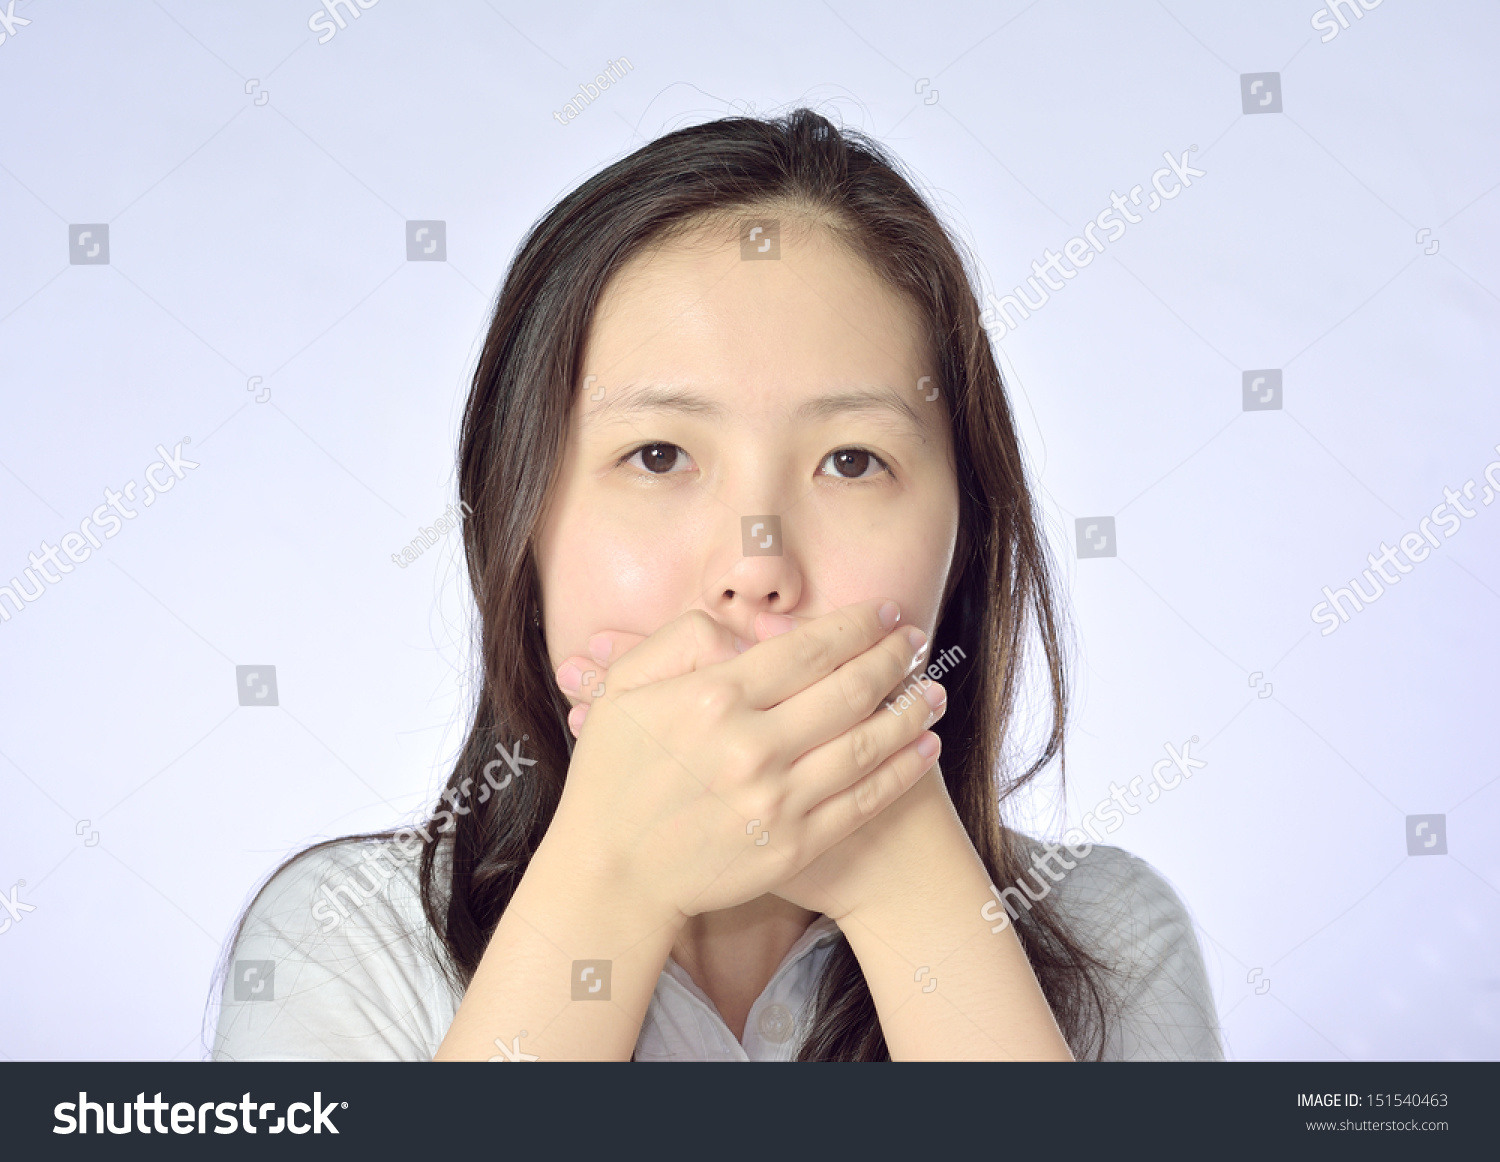 Young Asian Woman Covering Her Mouth Stock Photo 151540463 : Shutterstock